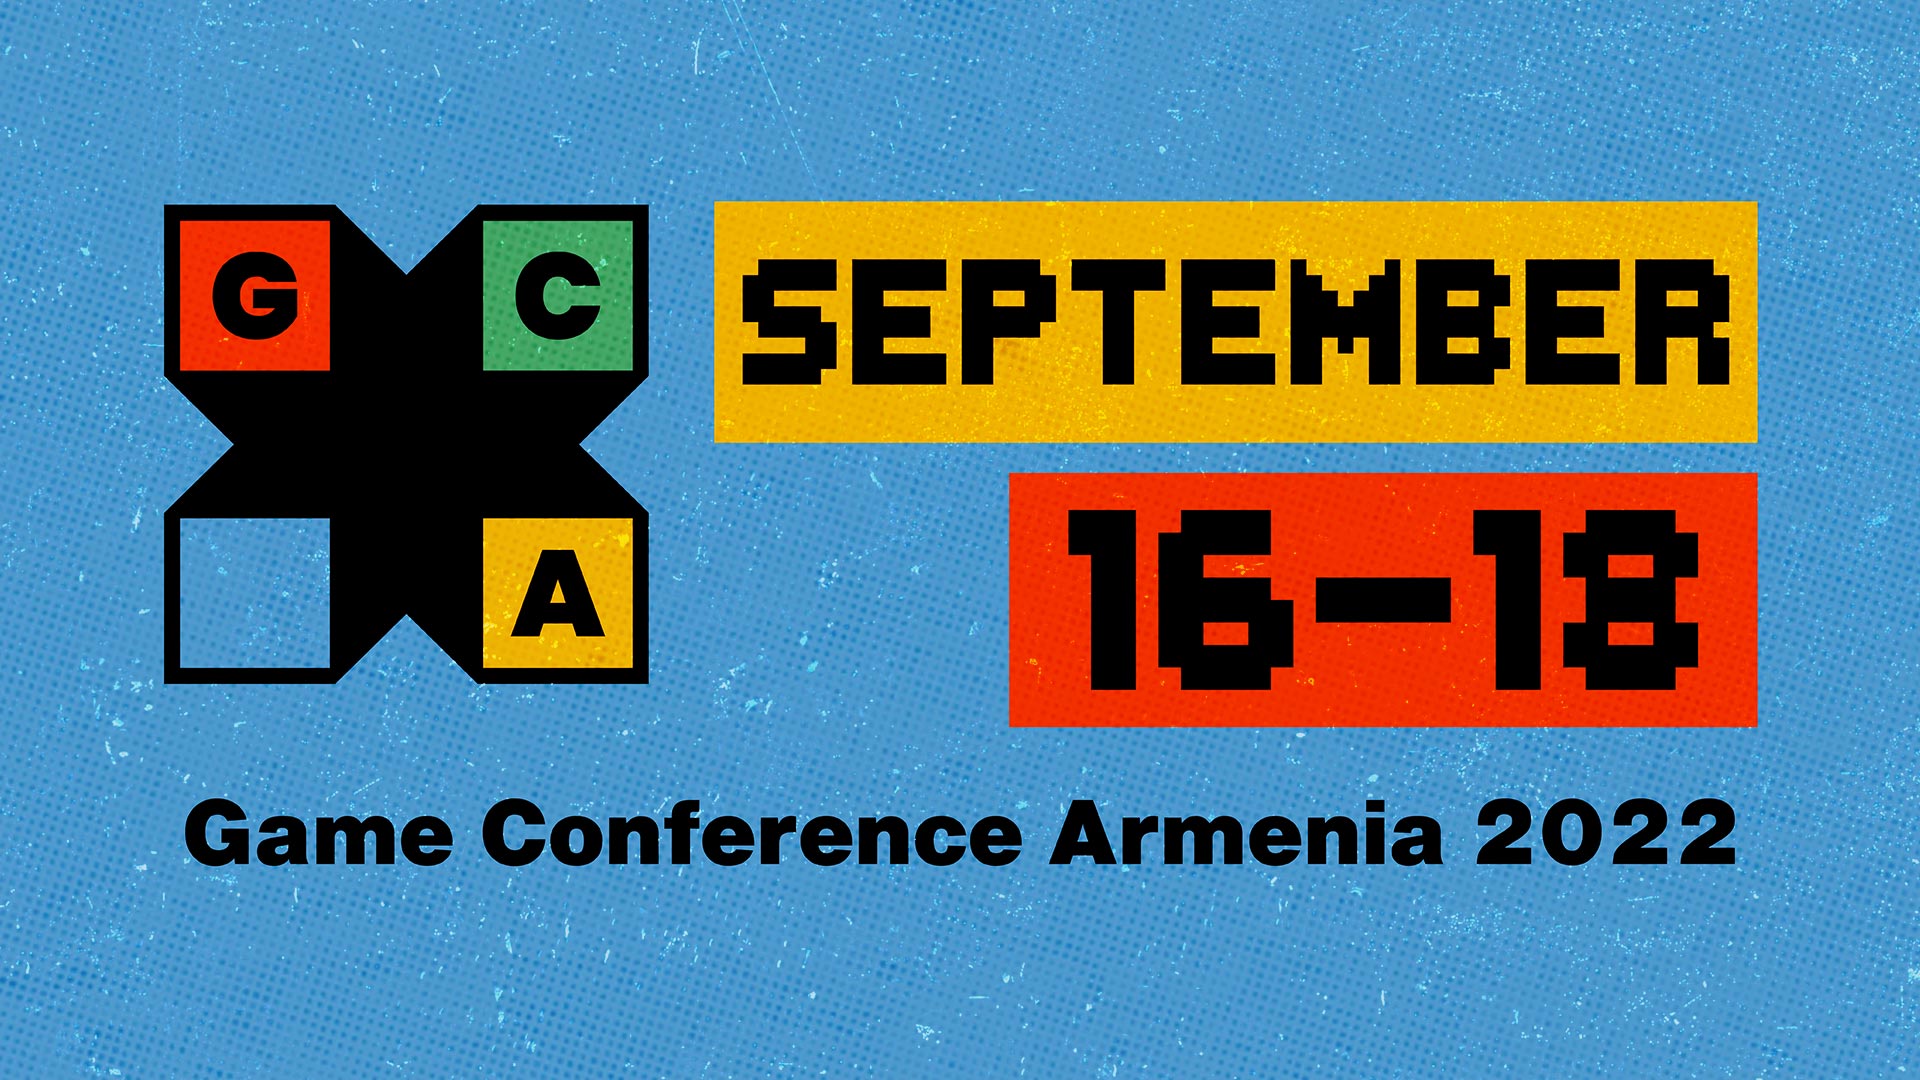 Game Conference Armenia 2022